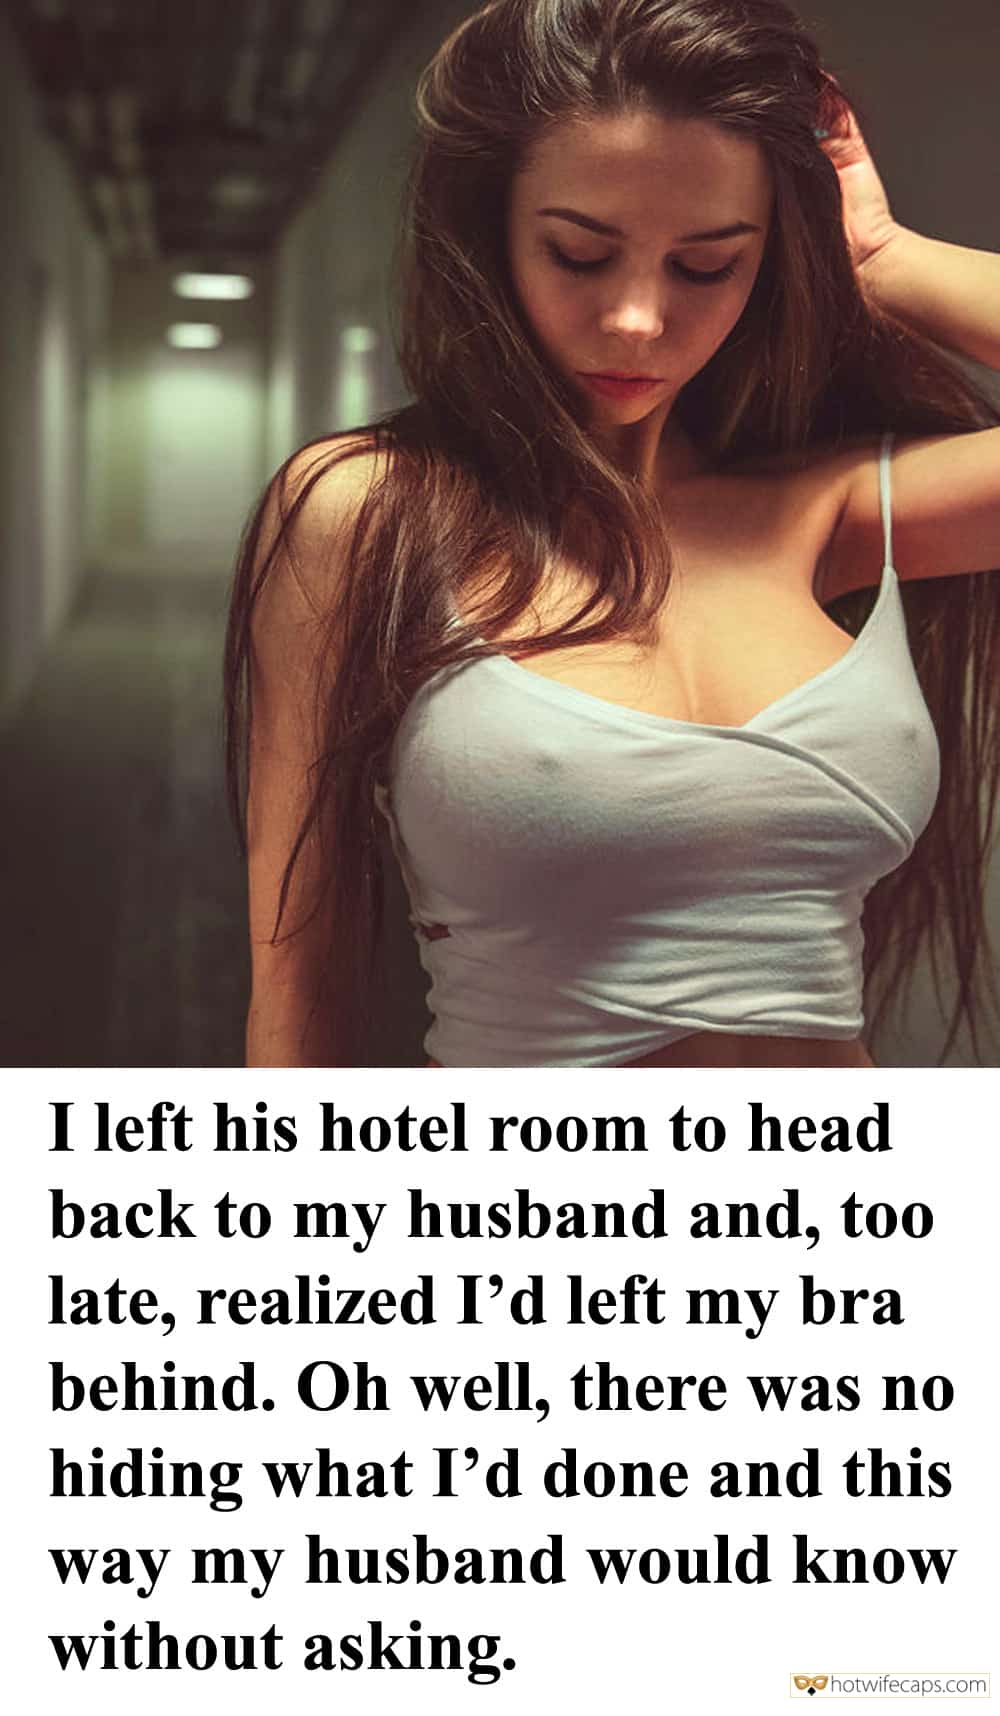 Sexy Memes hotwife caption: I left his hotel room to head back to my husband and, too late, realized I’d left my bra behind. Oh well, there was no hiding what I’d done and this way my husband would know without asking. Slutwife Returning...